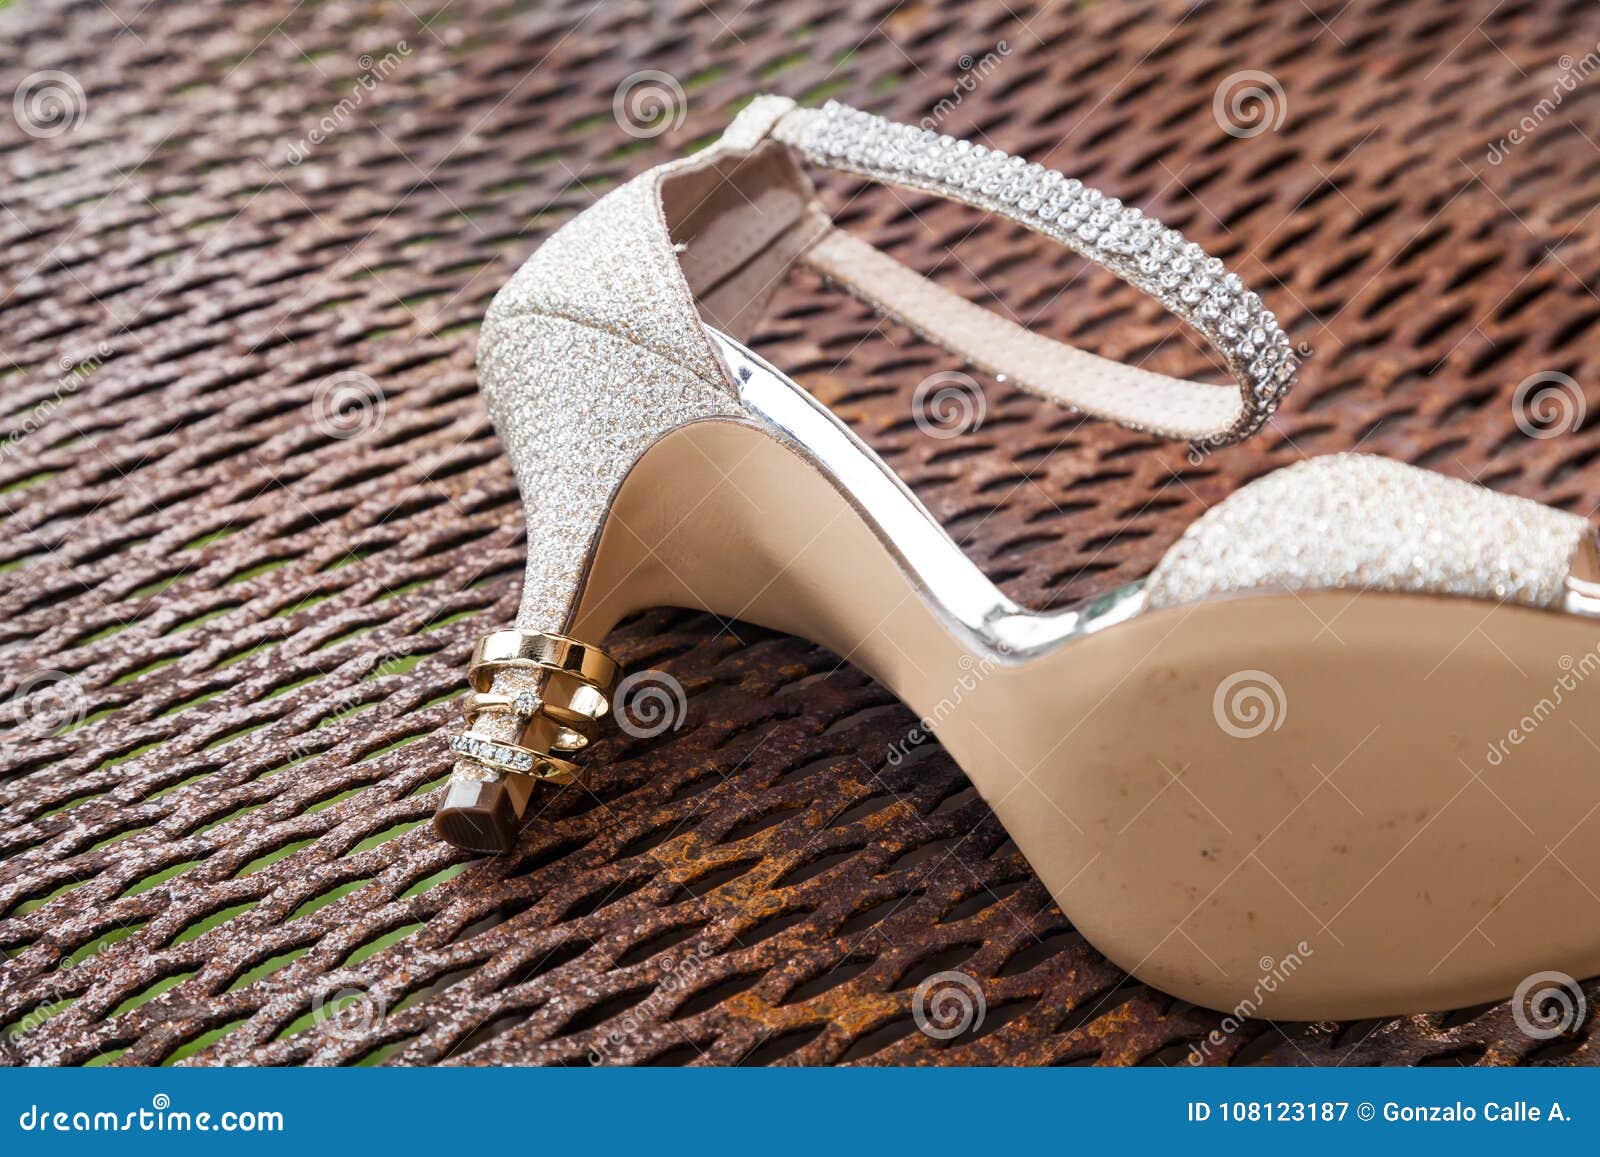 Wedding Rings, on the Heel of the Bride Stock Image - Image of gold ...